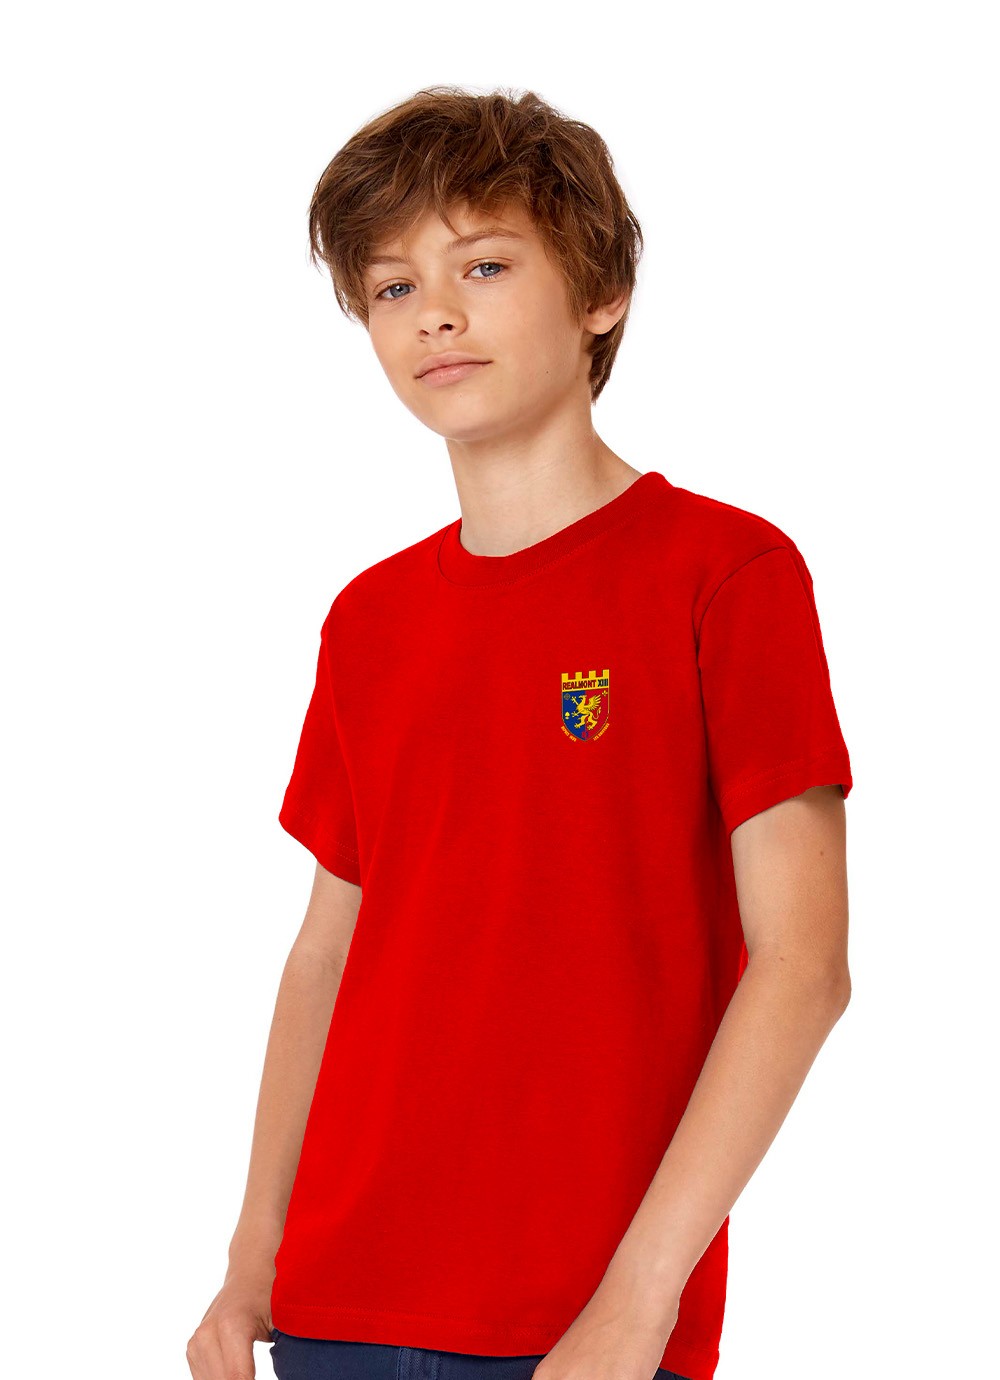 Tshirt enfant Realmont XIII rouge